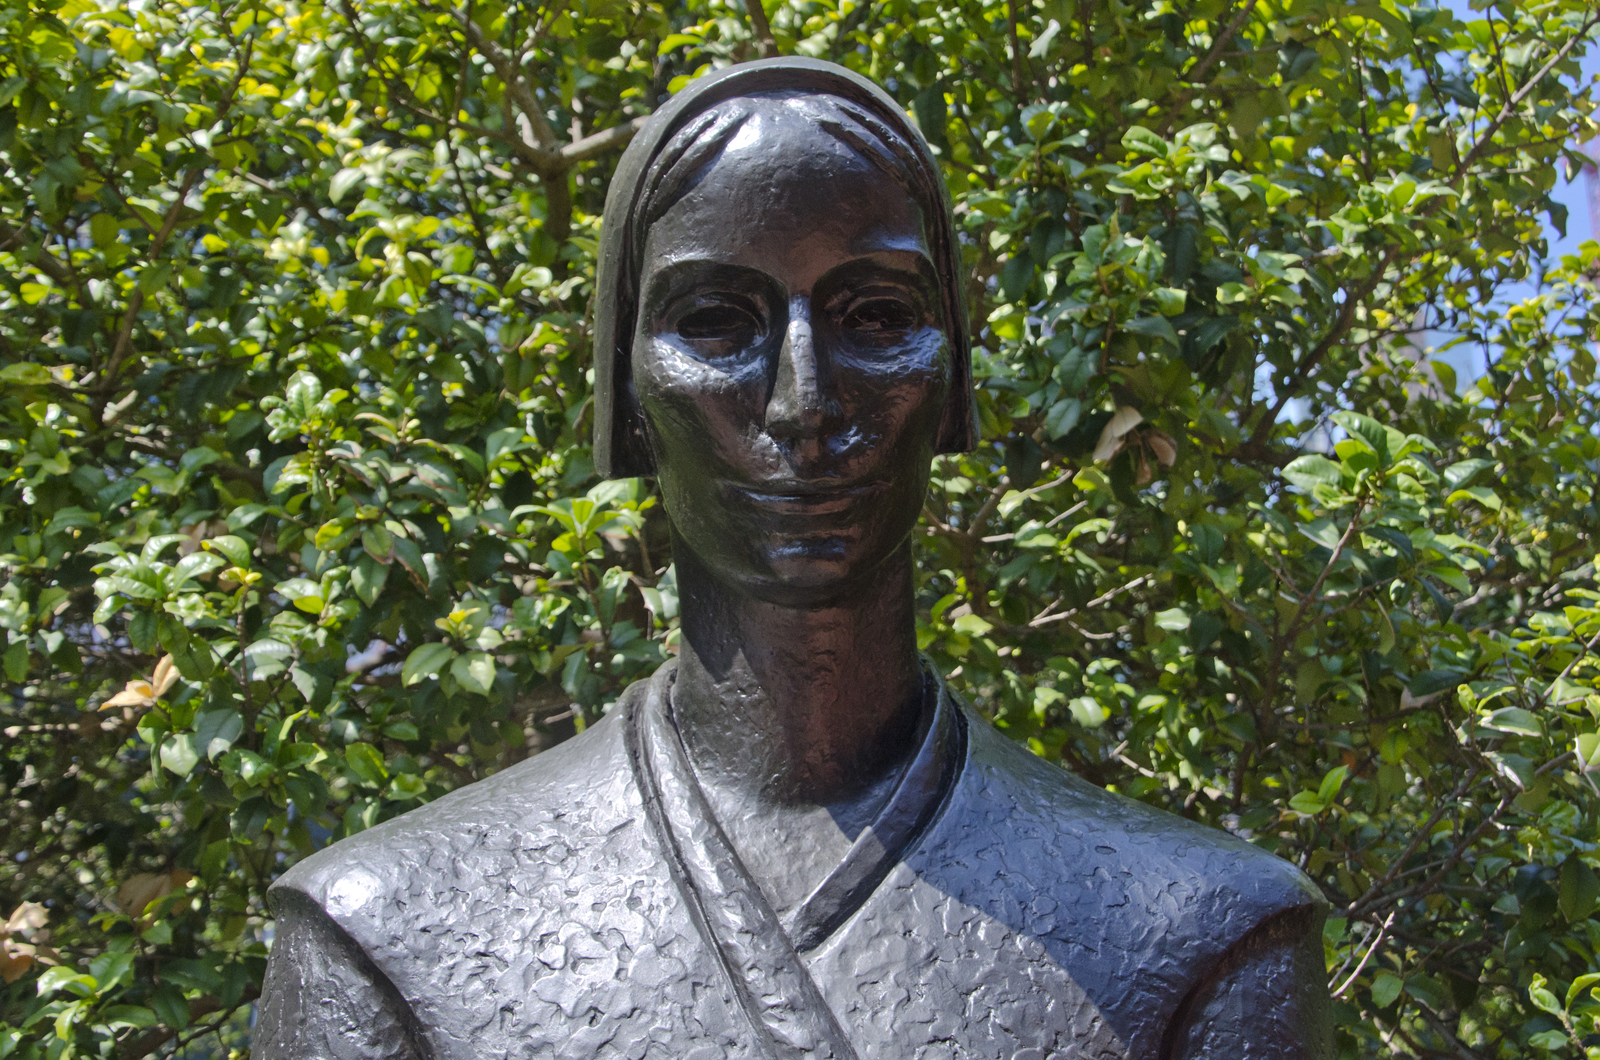 Mary Dyer